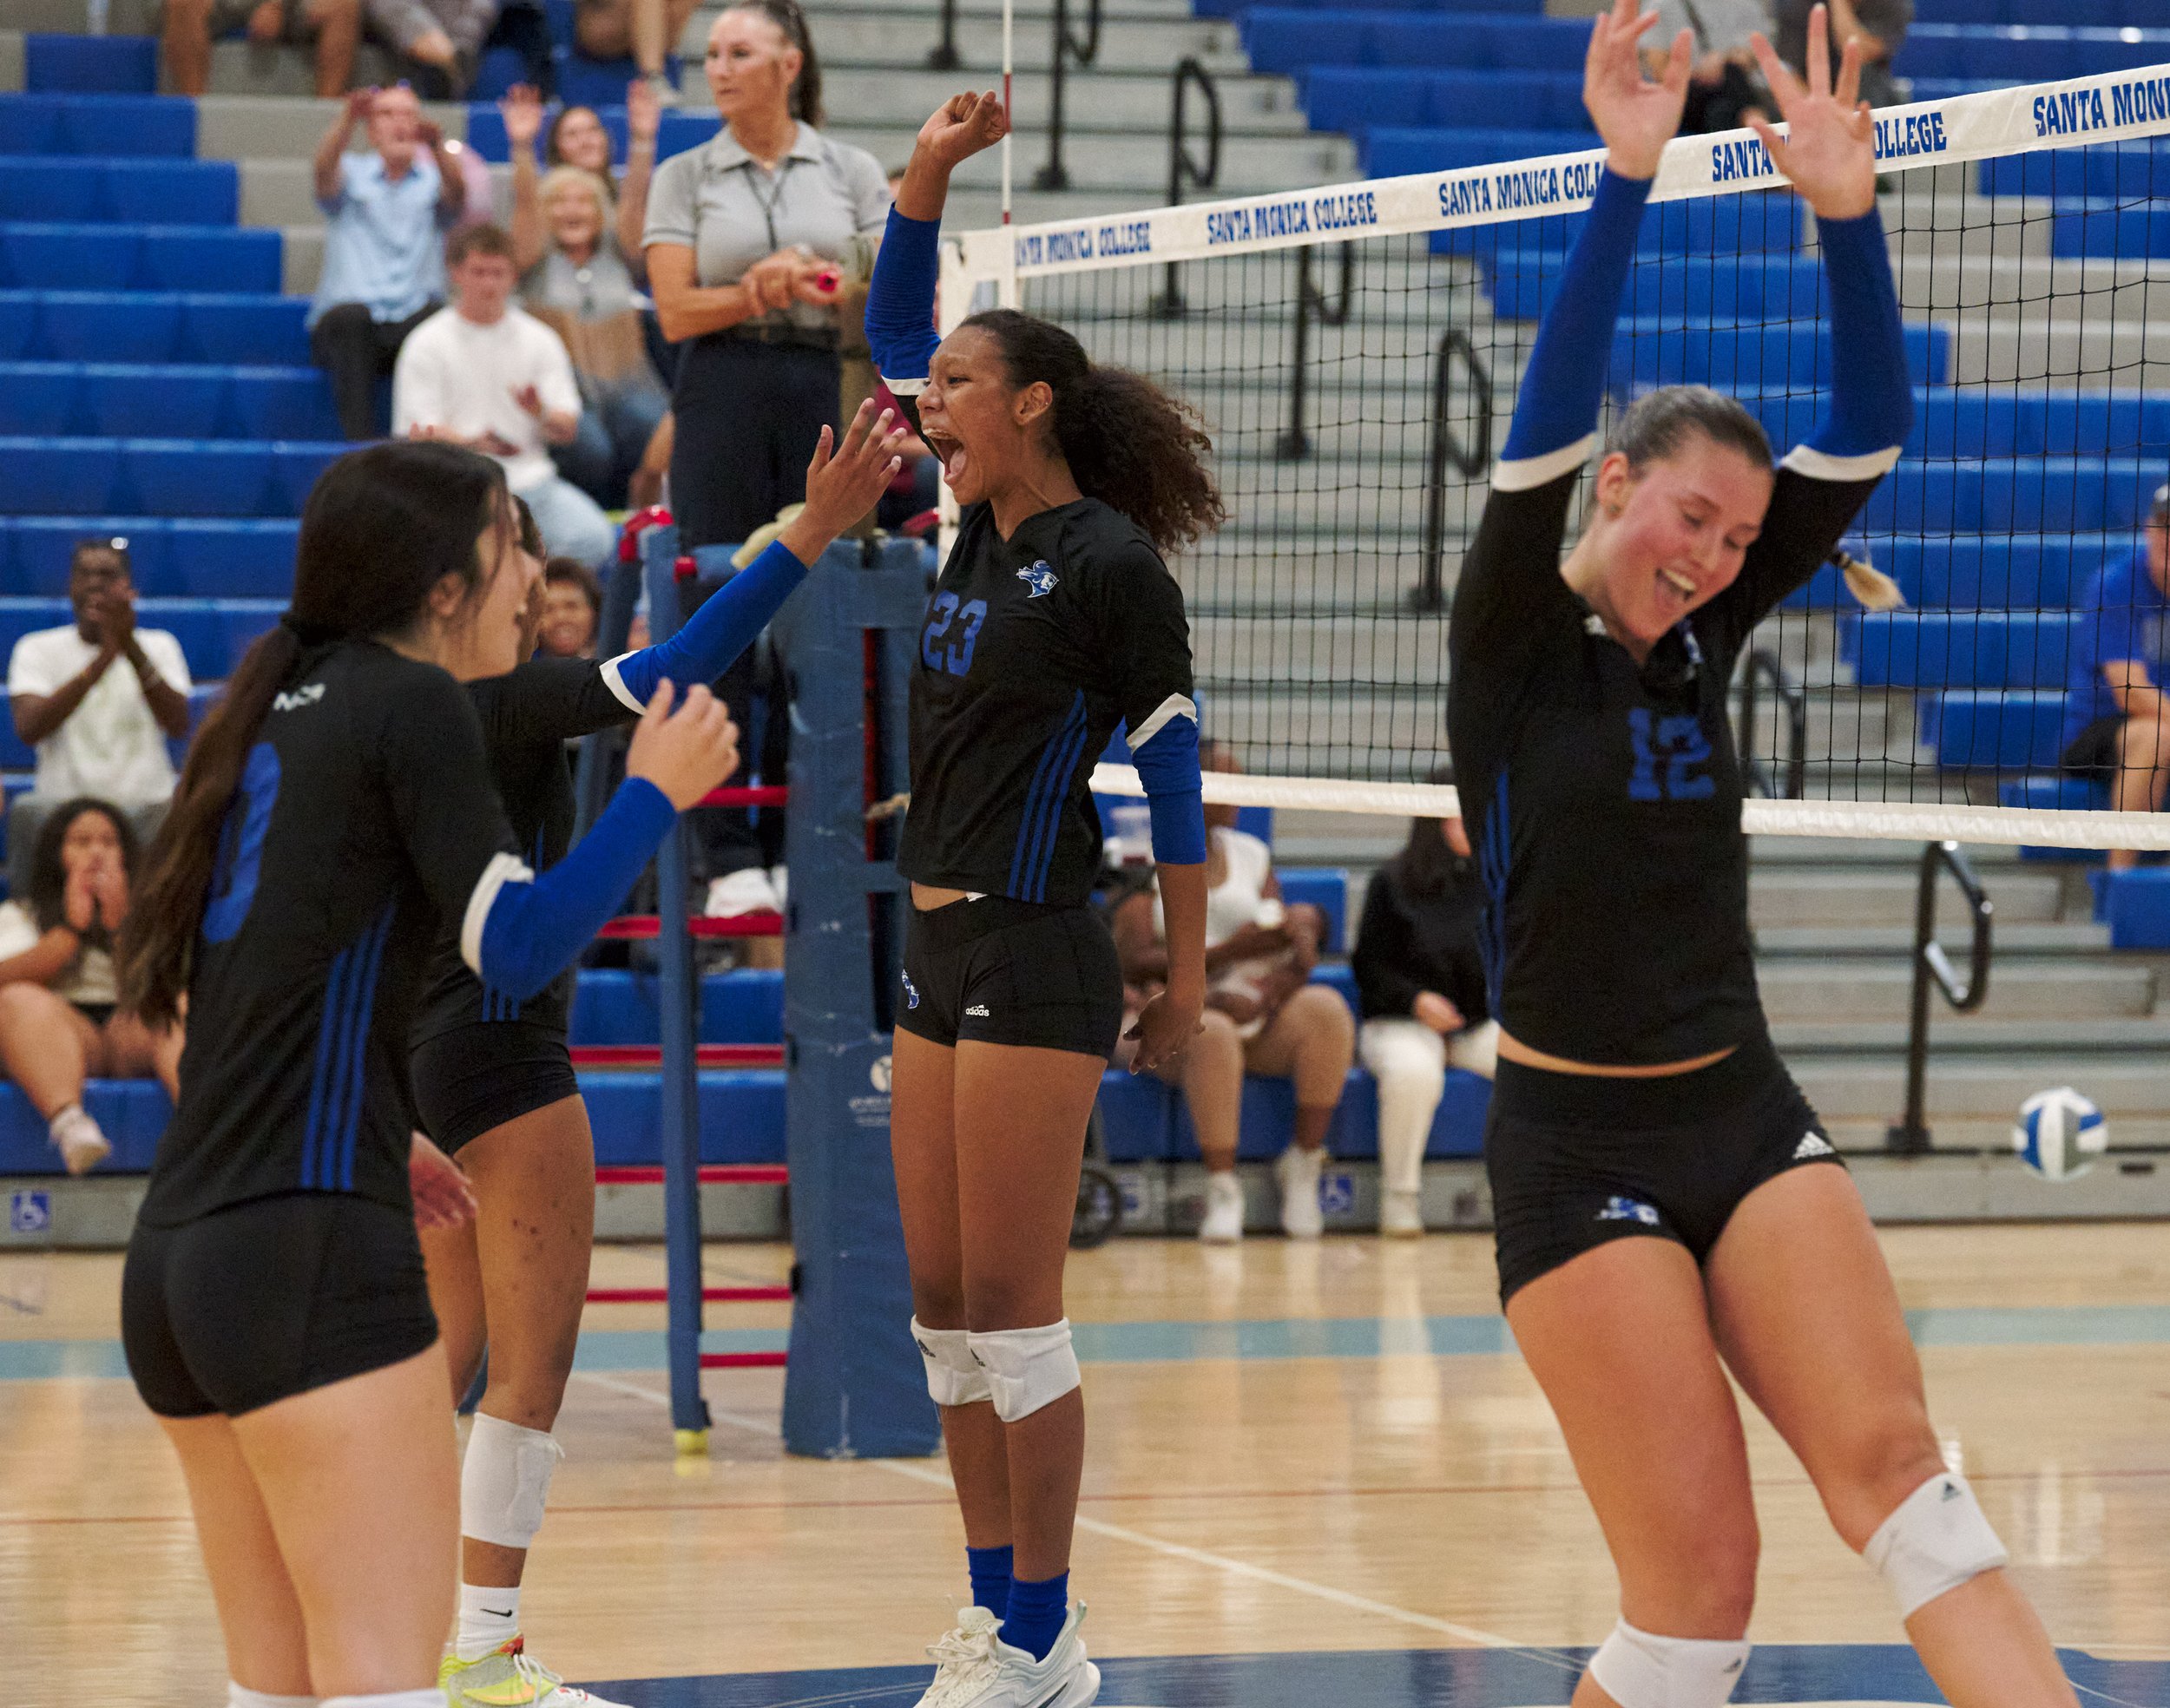  Santa Monica College Corsairs' Sophia Odle, Rain Martinez, and Mia Paulson during the women's volleyball match against the Moorpark College Raiders on Friday, Sept. 23, 2022, at the Corsair Gym in Santa Monica, Calif. The Corsairs won 3-2. (Nicholas